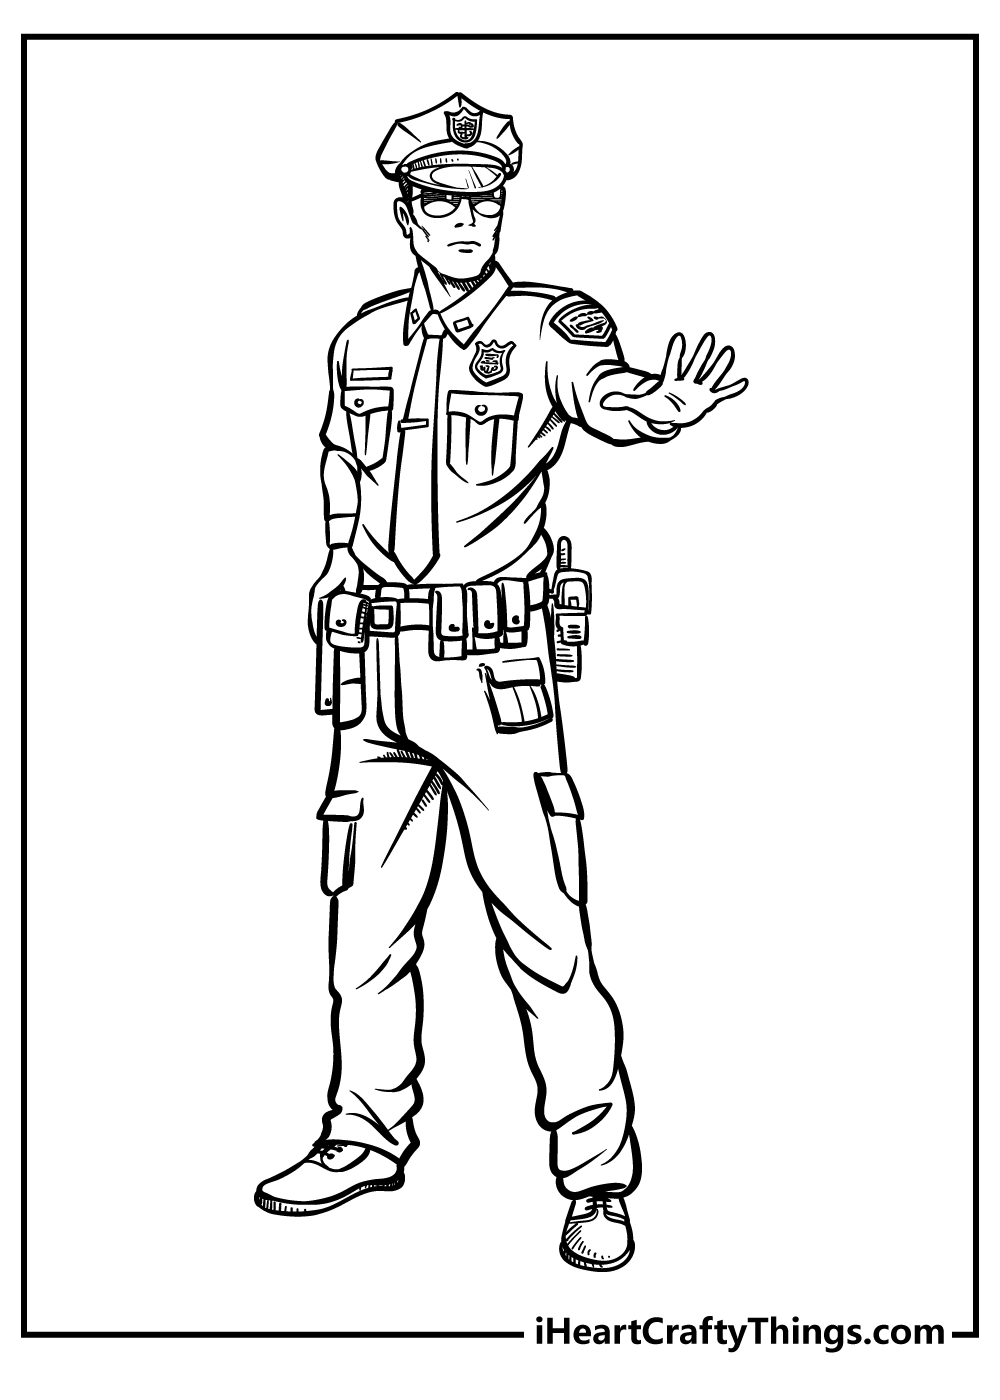 Police Coloring Pages free pdf download